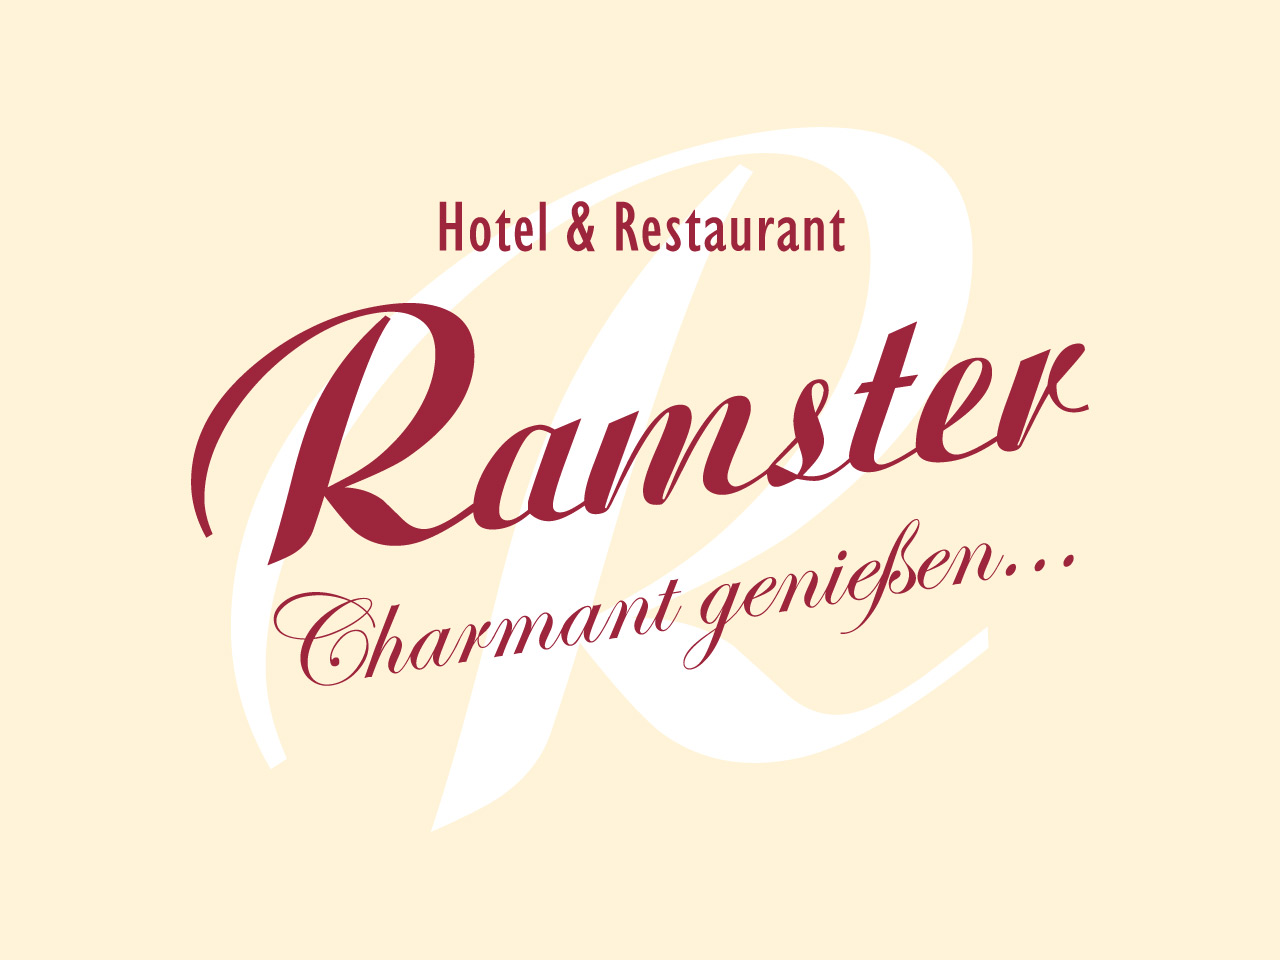 Hotel Ramster